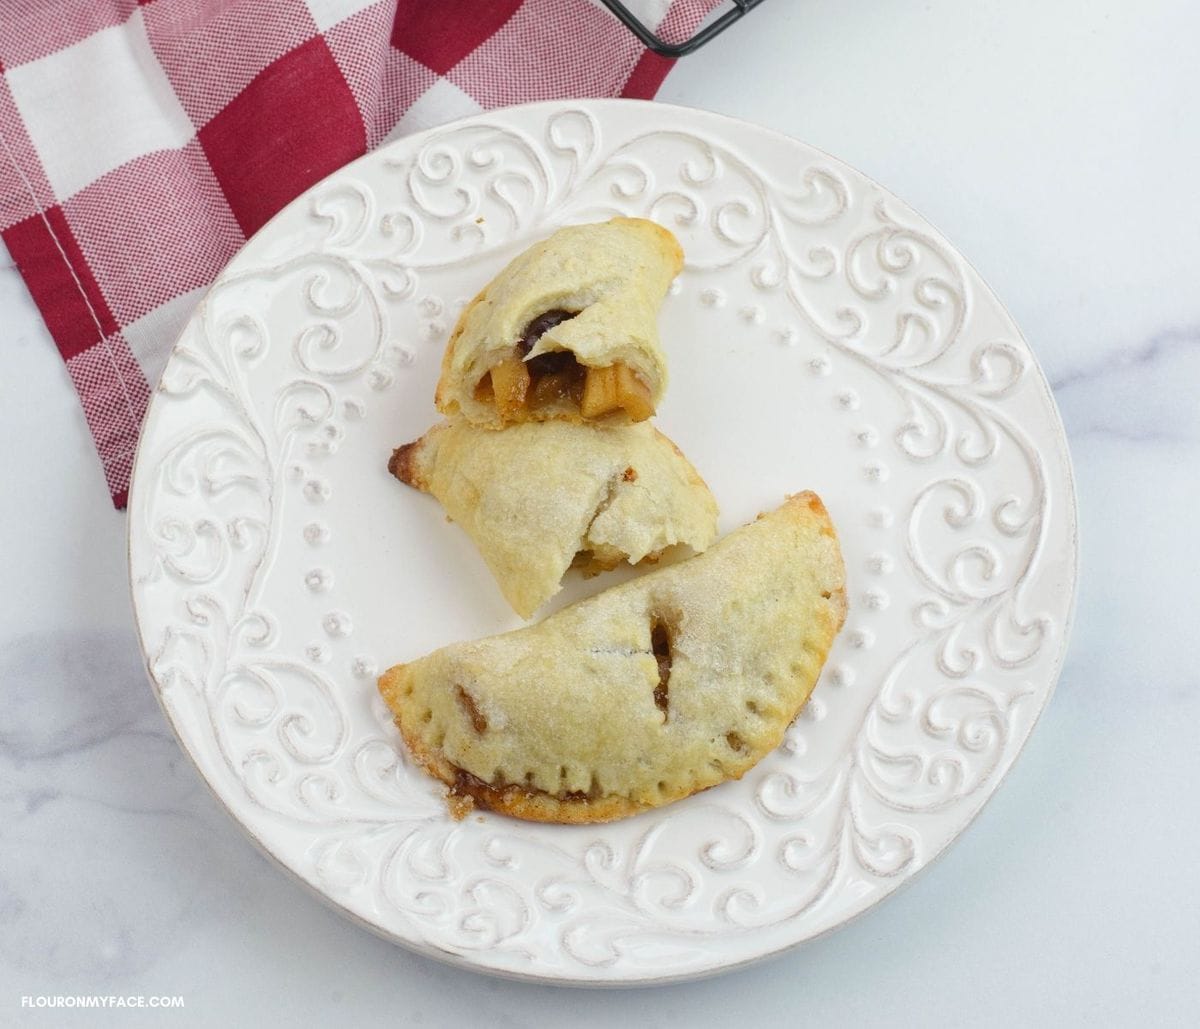 Two apple turnovers on a dessert plate.